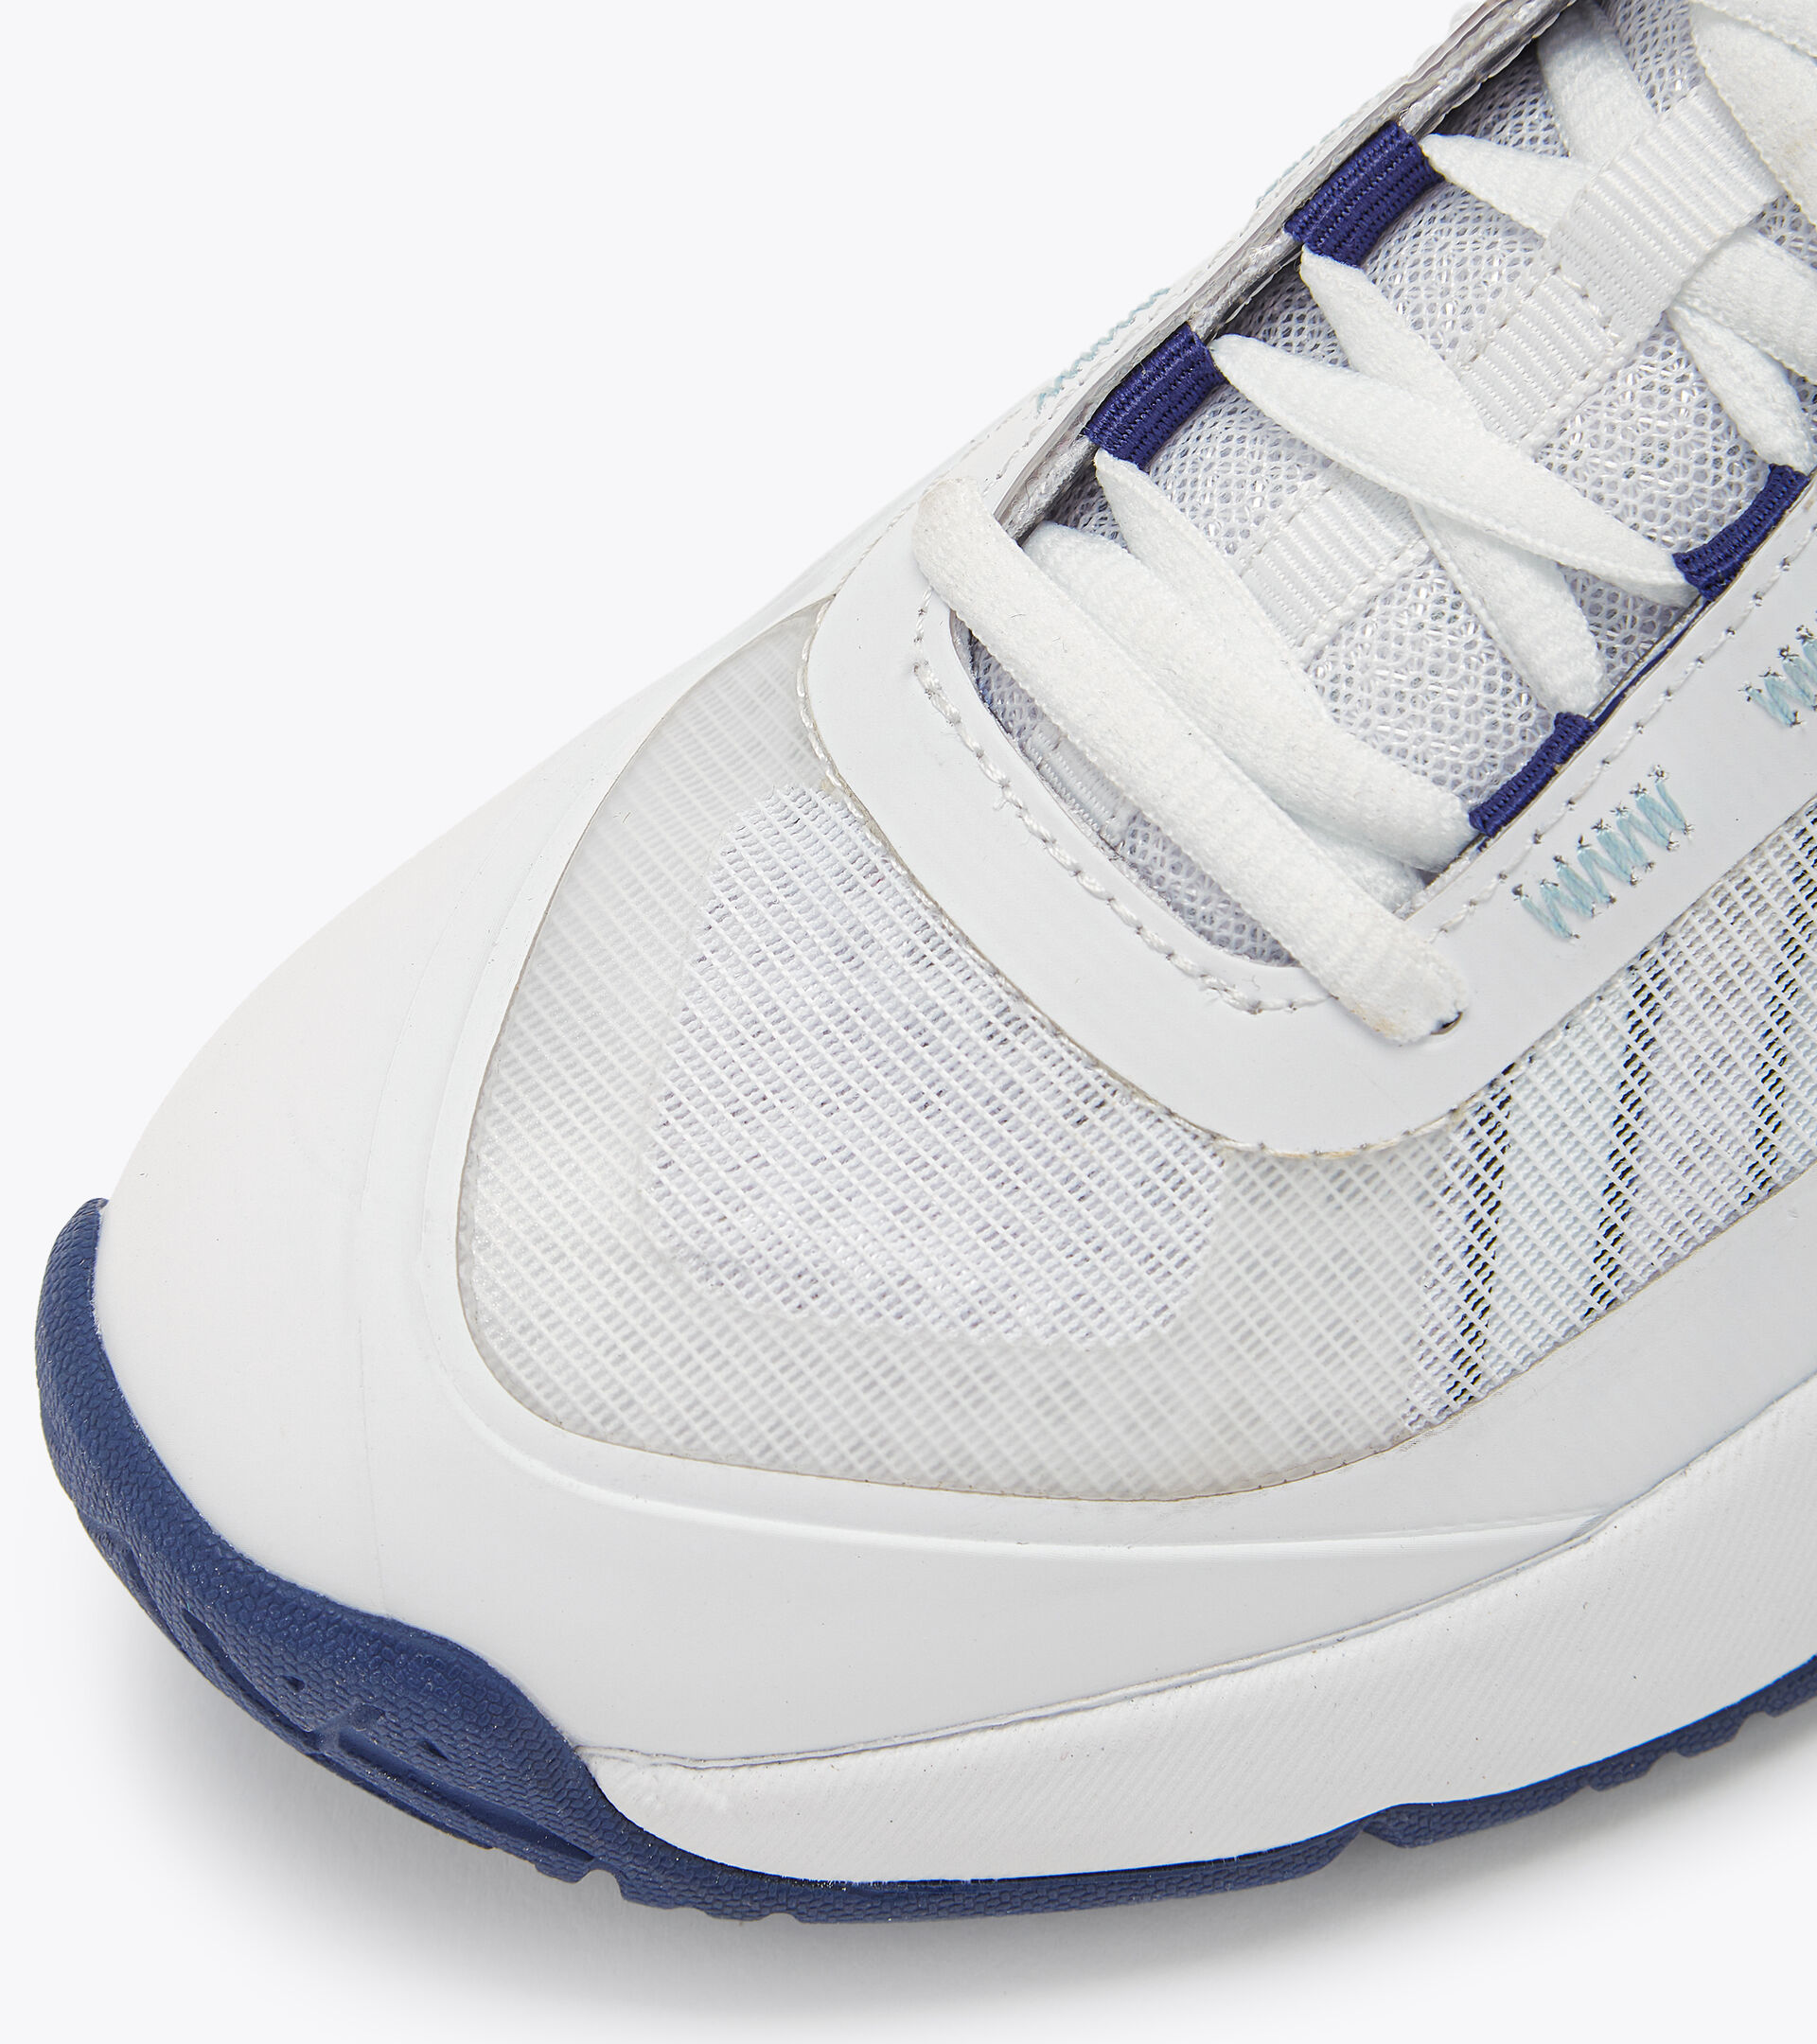 Tennis shoes for hard surfaces or clay courts - Women FINALE W AG WHITE/BLUE PRINT - Diadora